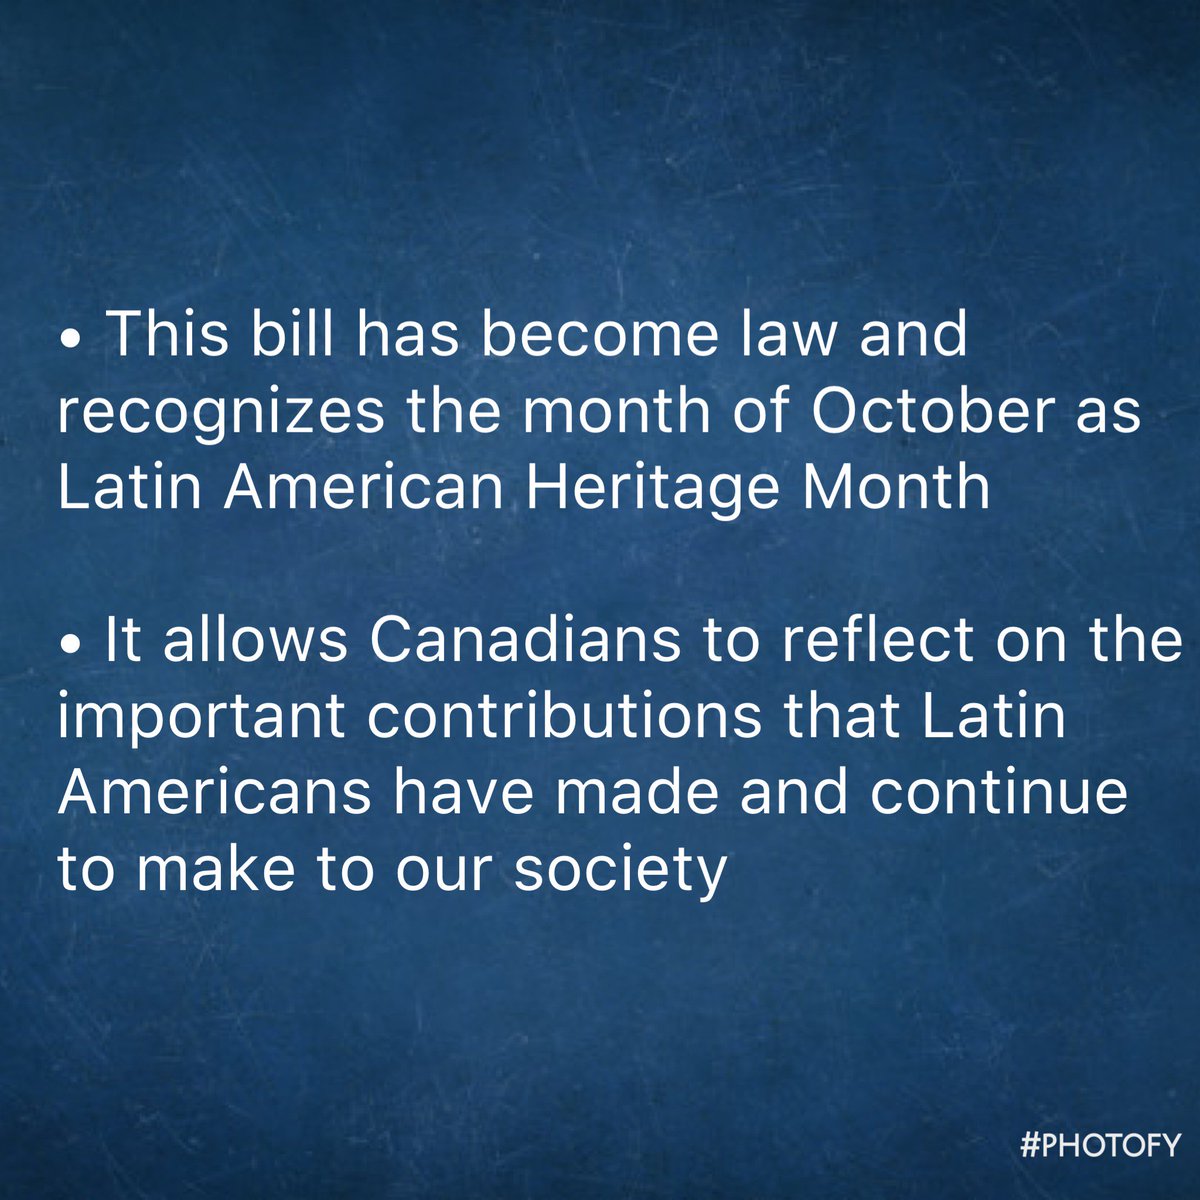 The late @SenatorEnverga‘s Bill S-218 is the focus of our look at positive @CPC_HQ bills today. It recognizes October as Latin American Heritage Month and serves as a legacy to the Senator, who worked tirelessly to promote multiculturalism. #constructiveopposition #resultsbyCPC